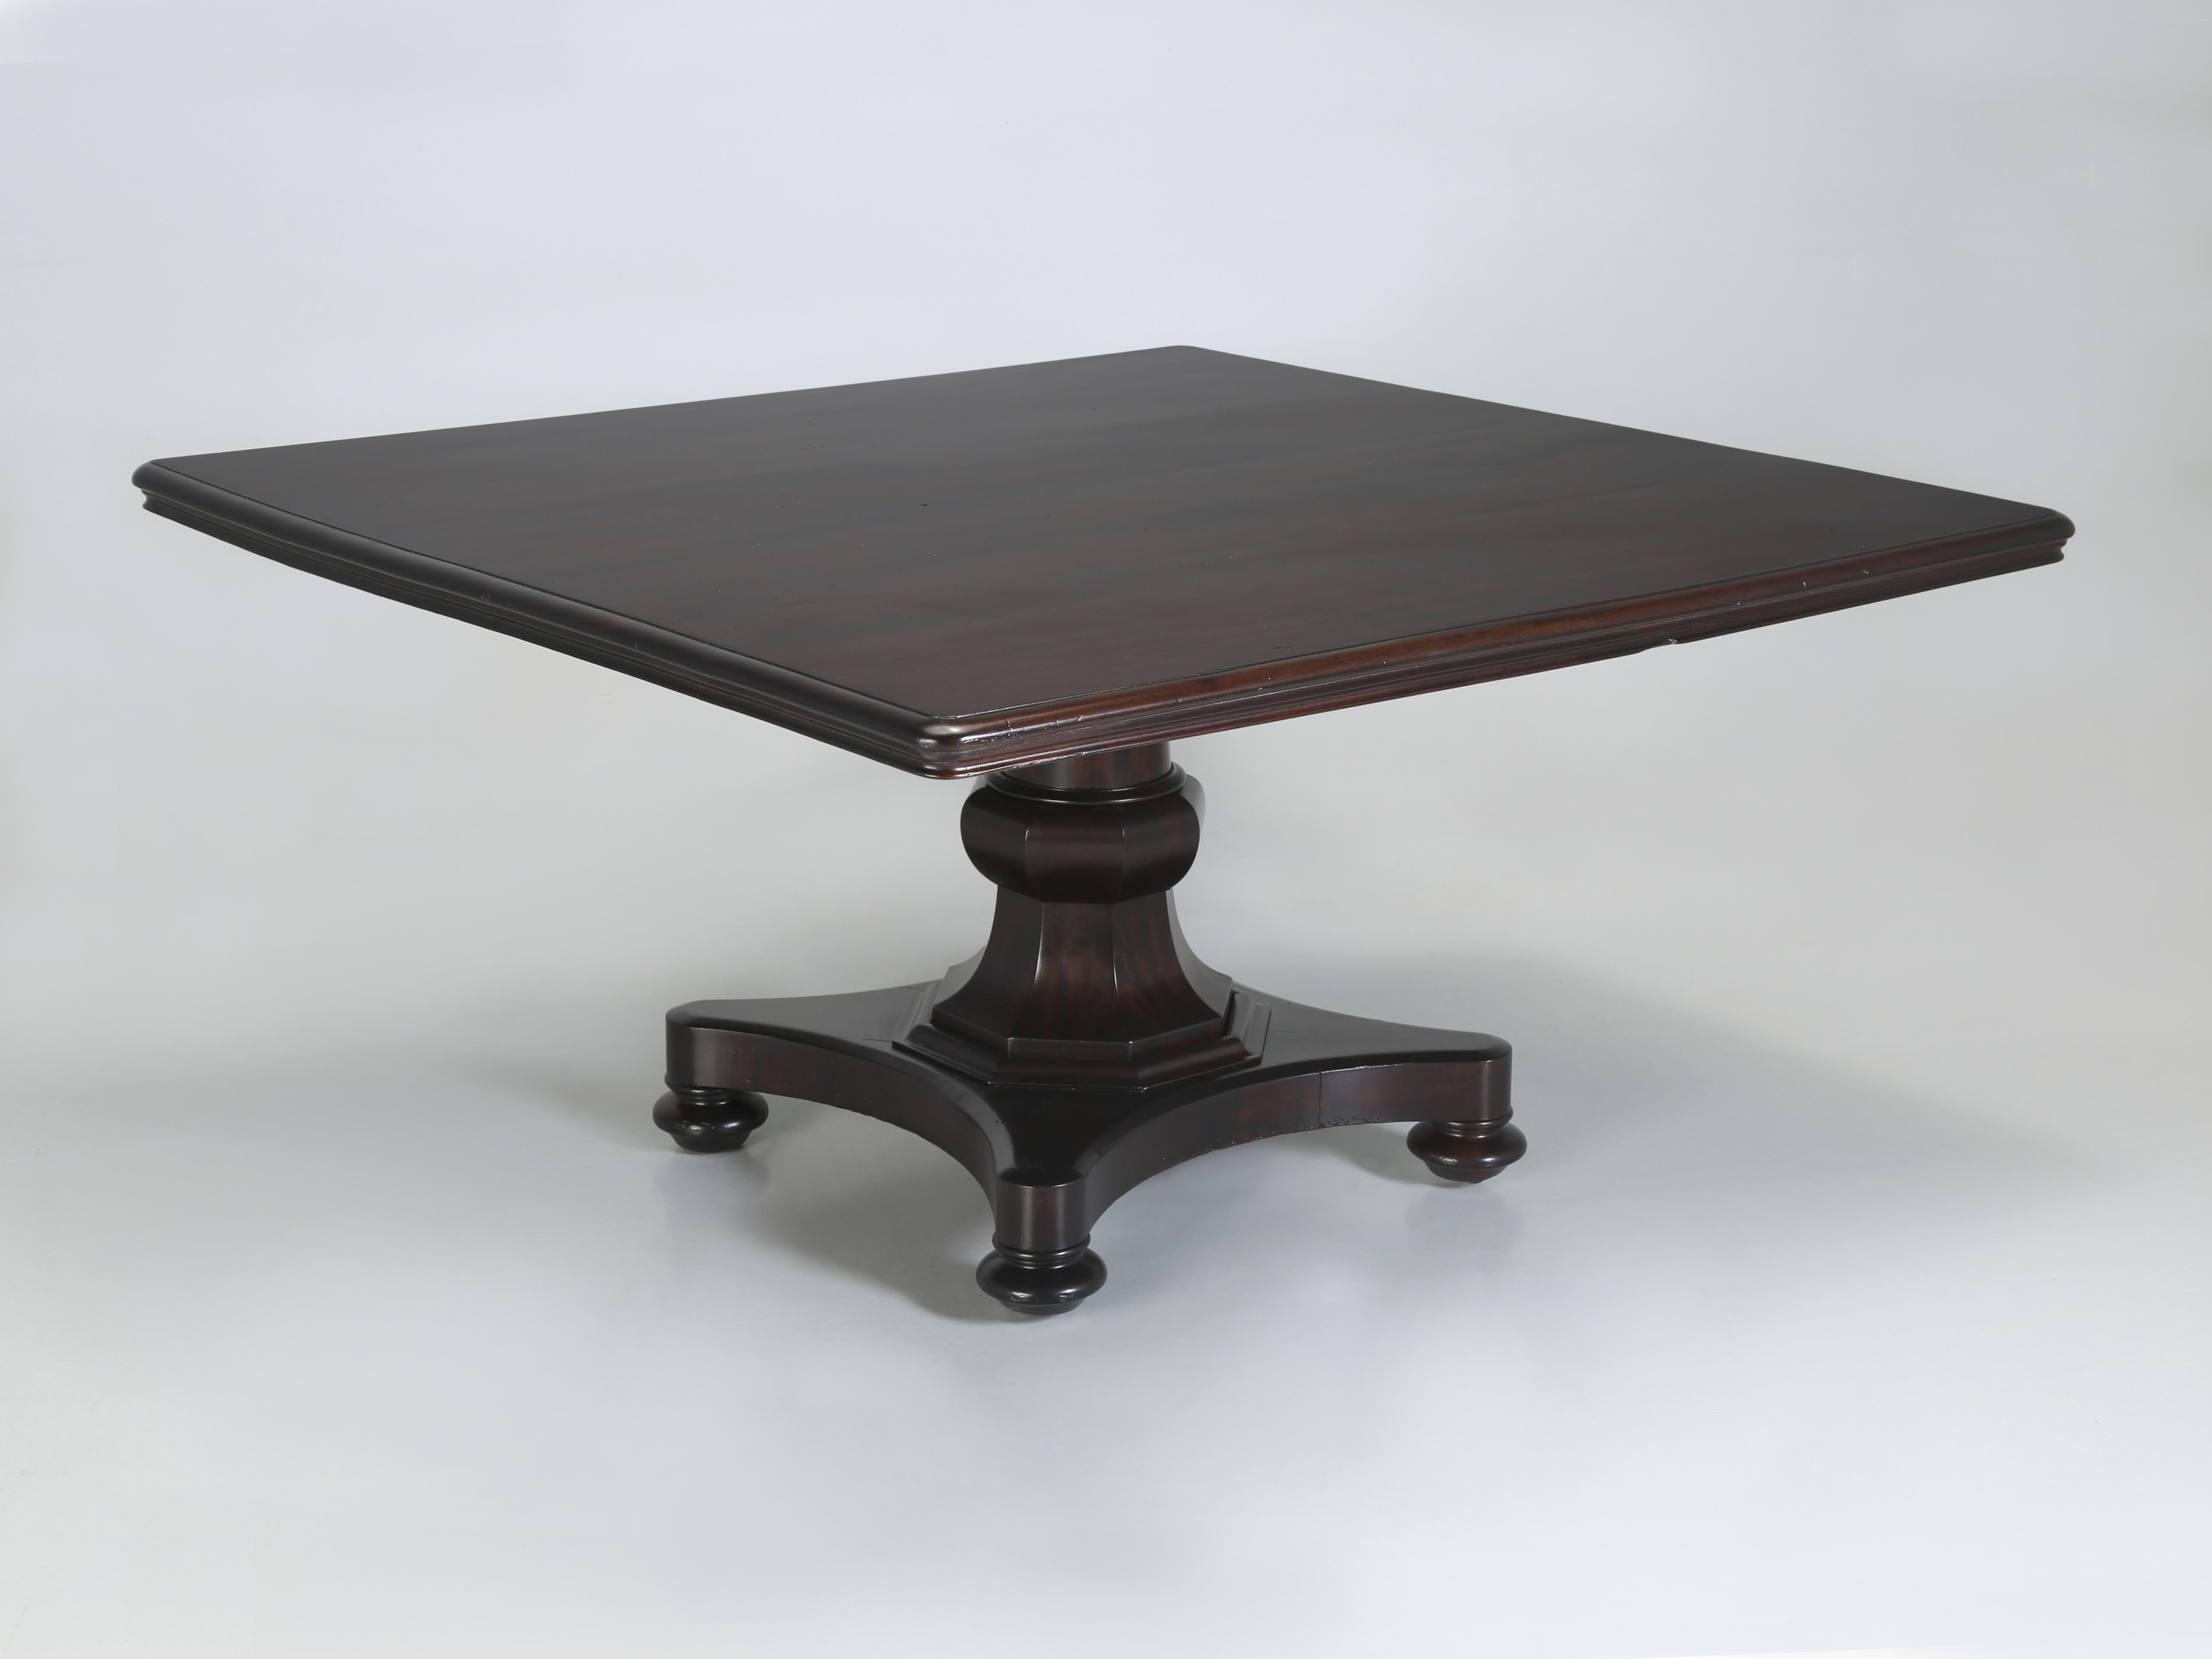 Antique English Mahogany Dining Table, although in England you might call this a Kitchen Table. The almost square design allows you to comfortably seat a party of (8) for dinner, or breakfast, without bumping elbows. Classic English style from the